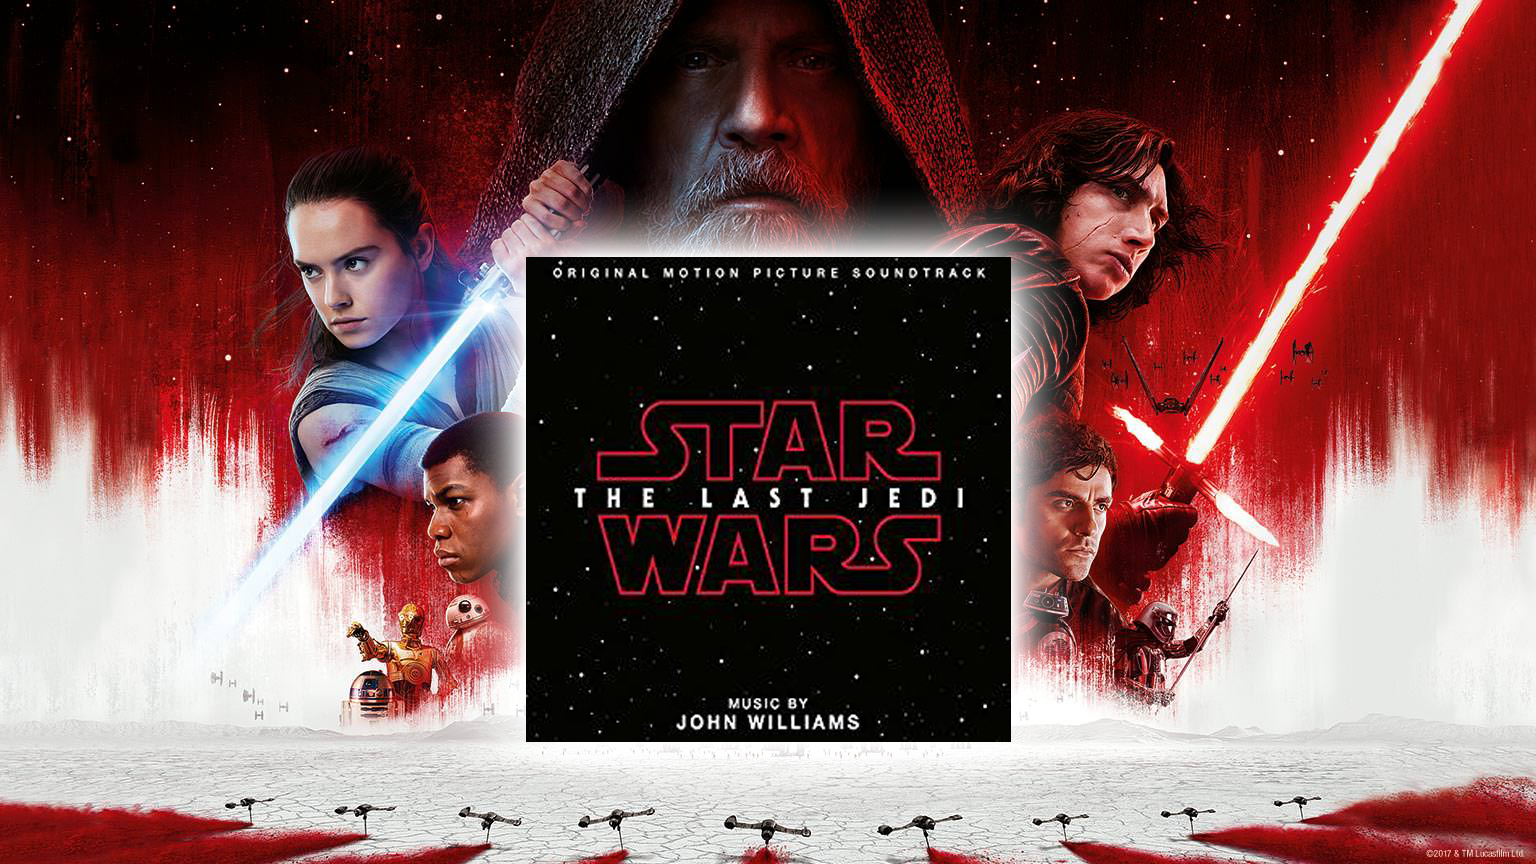 Star Wars: The Last Jedi Original Motion Picture Soundtrack Available Today!